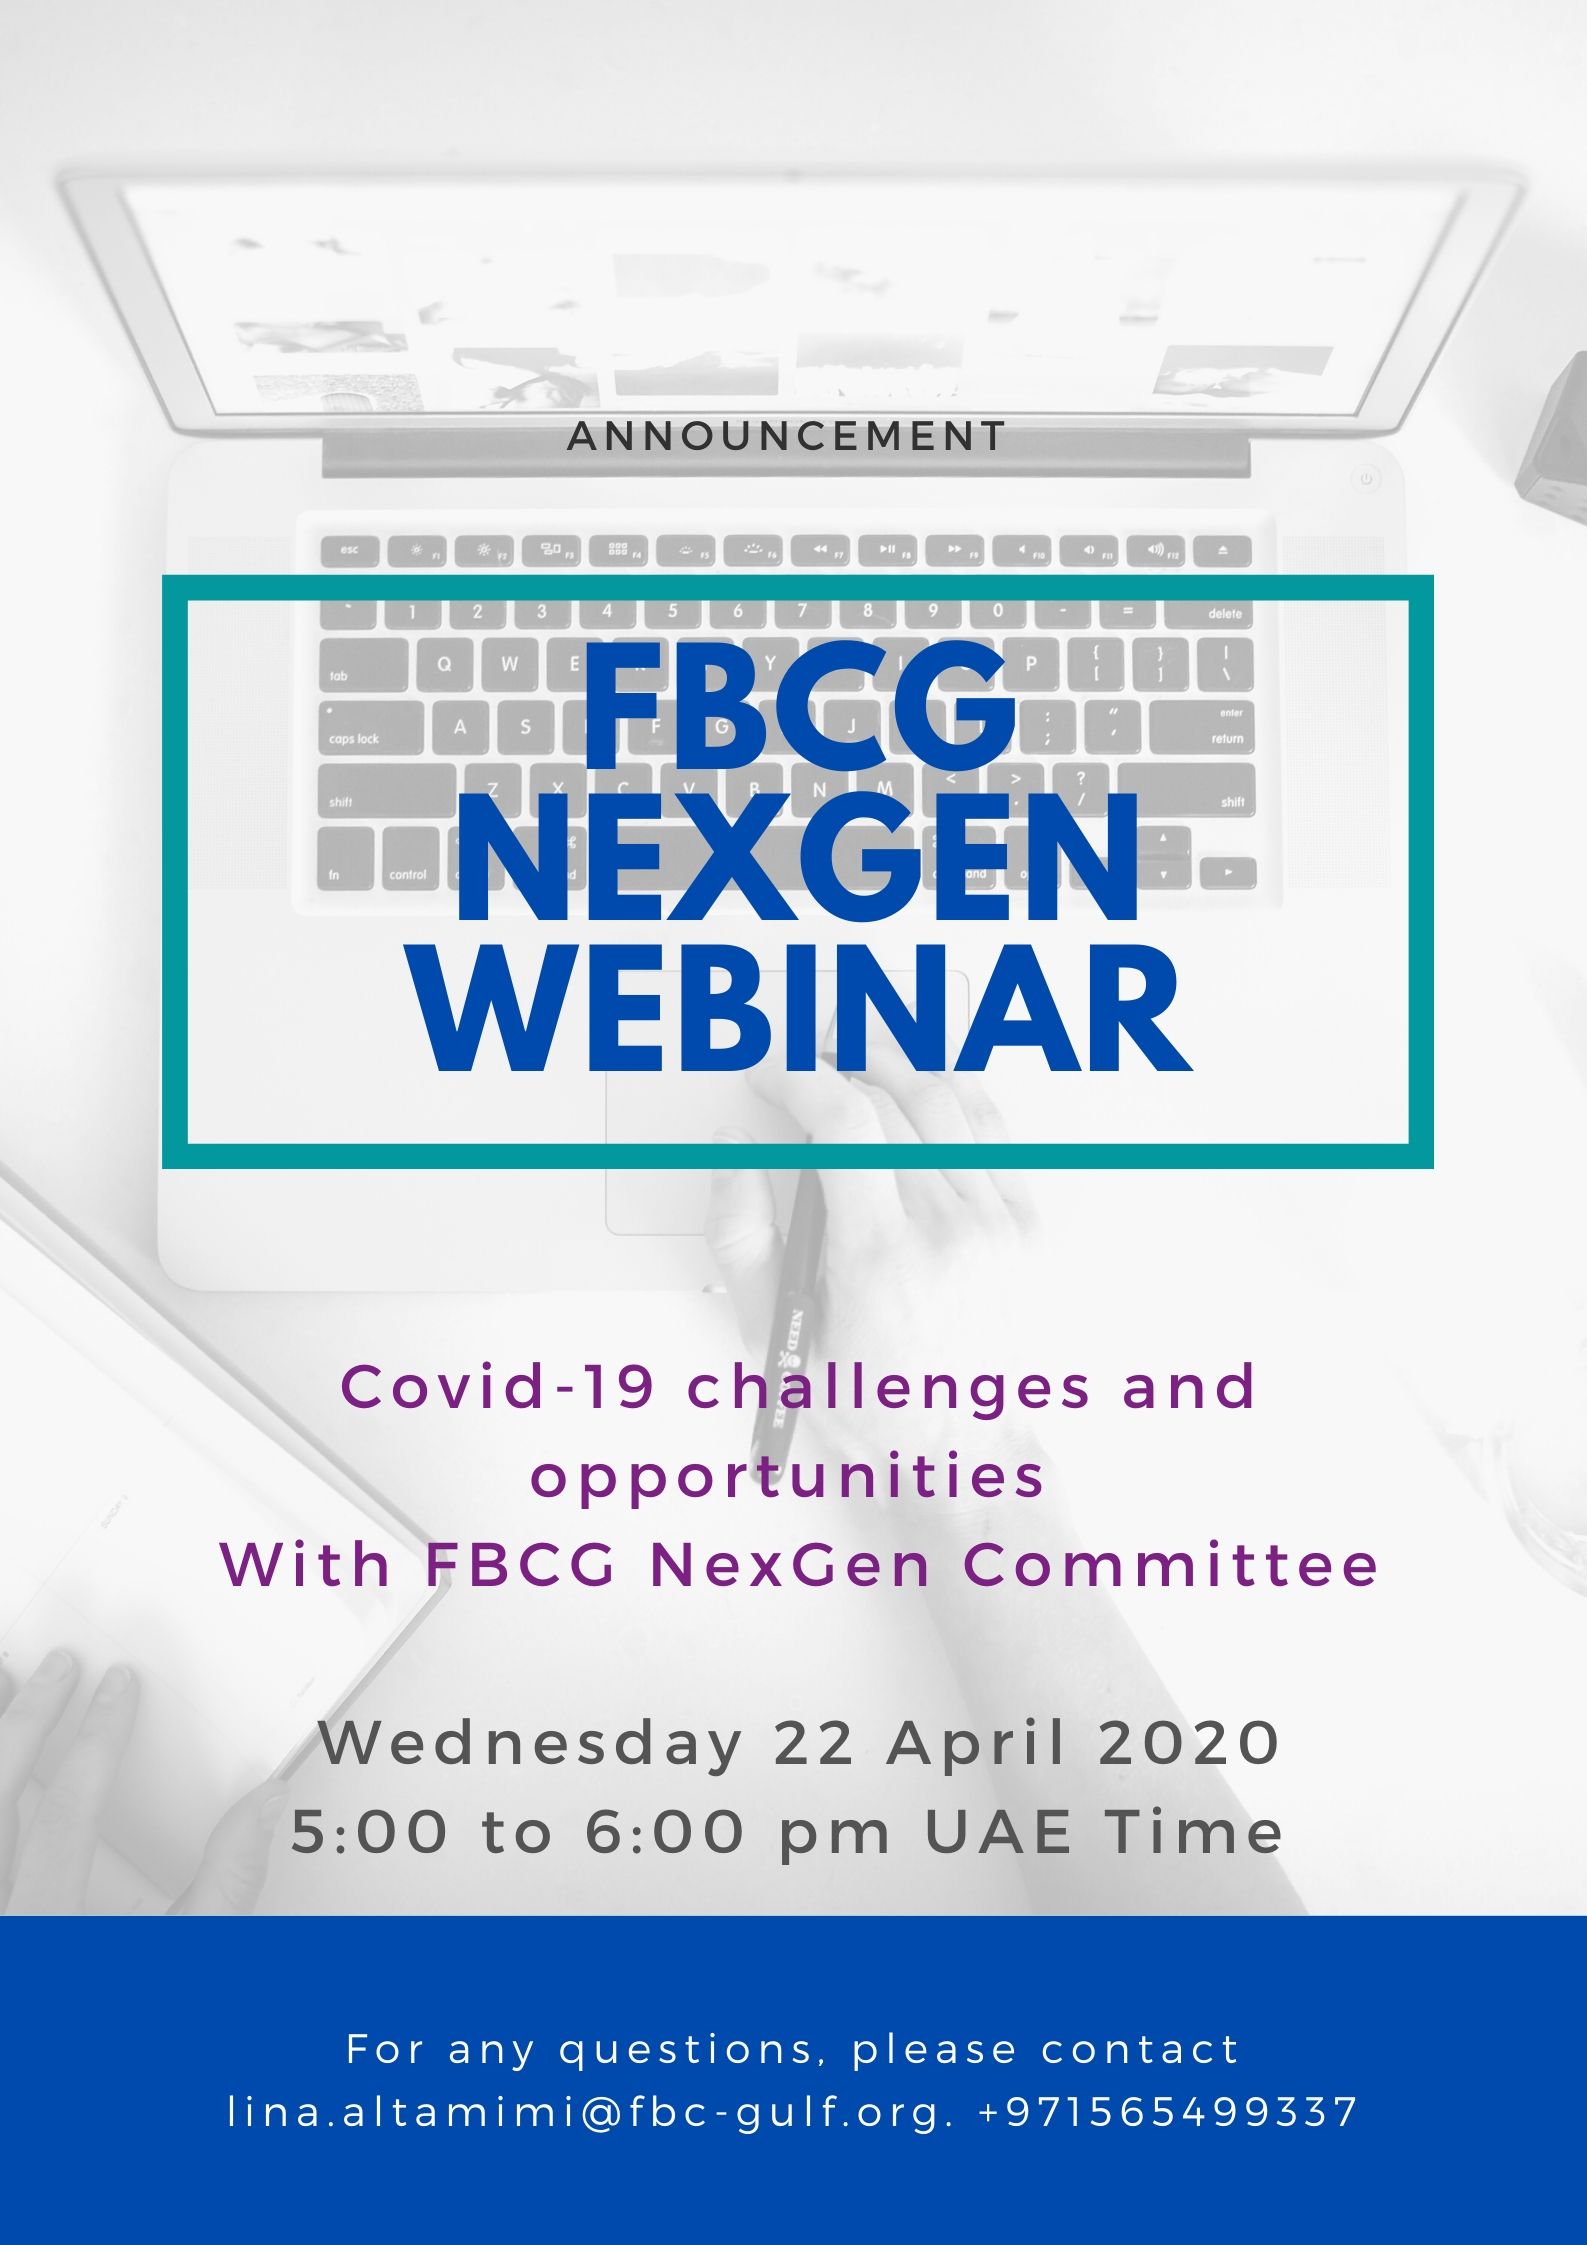 NxG Webinar – Covid-19 challenges and opportunities